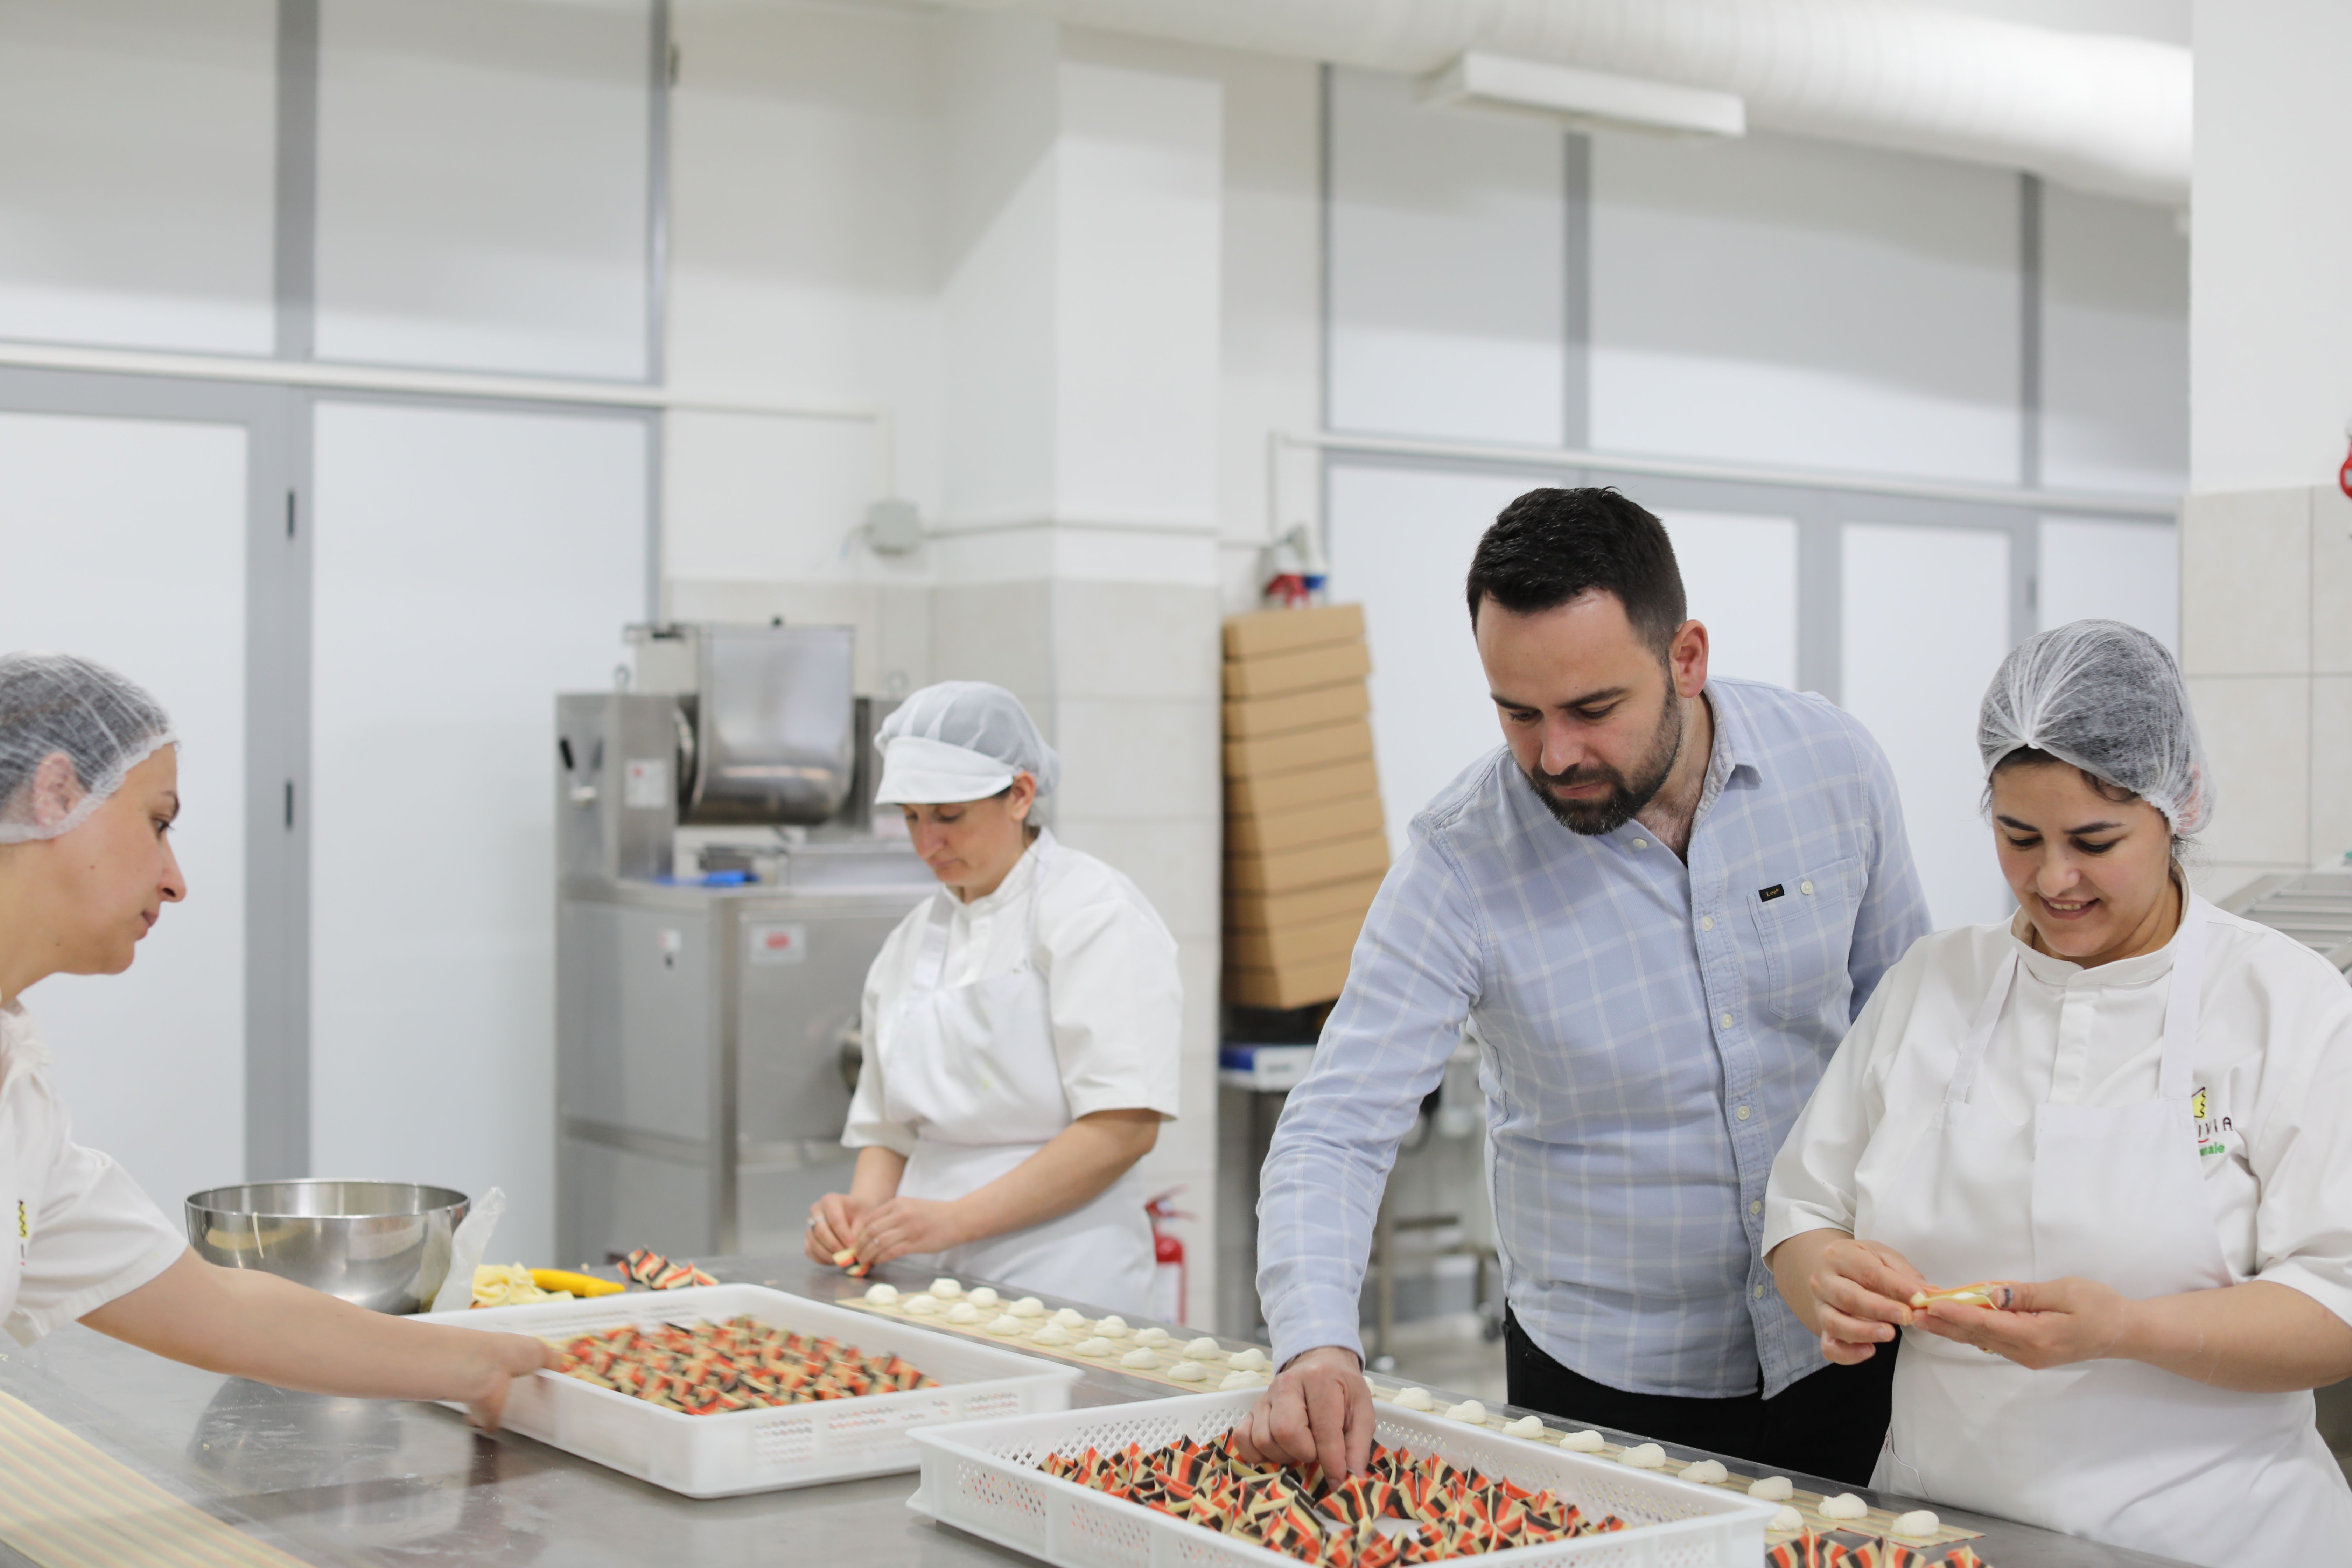 Under the guidance of the program, Pasta Livia has undergone a remarkable transformation, emerging as a stronger entity with enhanced management practices, heightened productivity, improved product quality, and more efficient customer care procedures. 